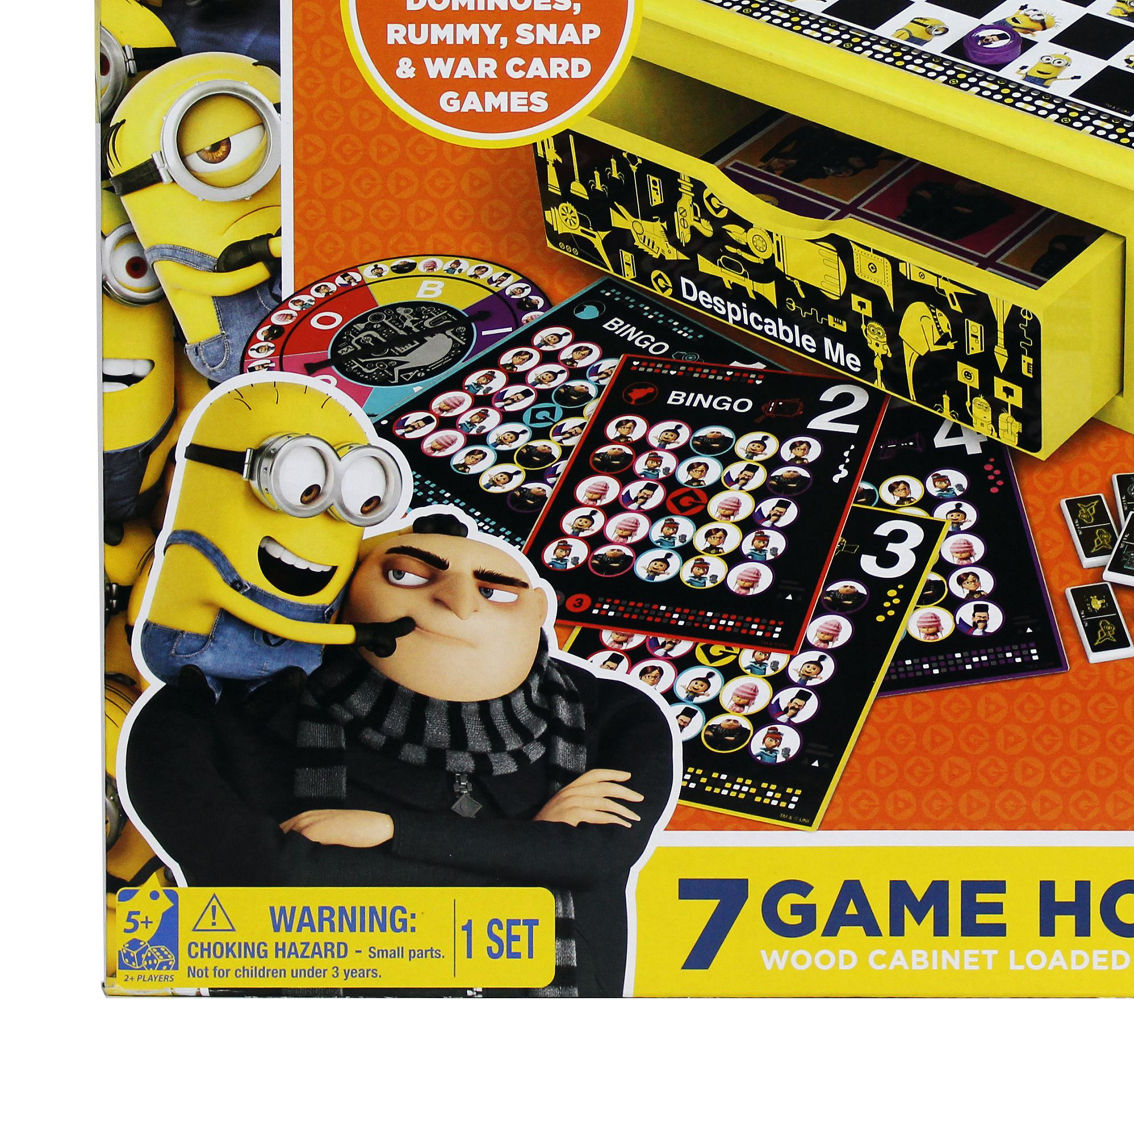 Cardinal Despicable Me 3 7-in-1 Game House Wood Cabinet - Image 2 of 2